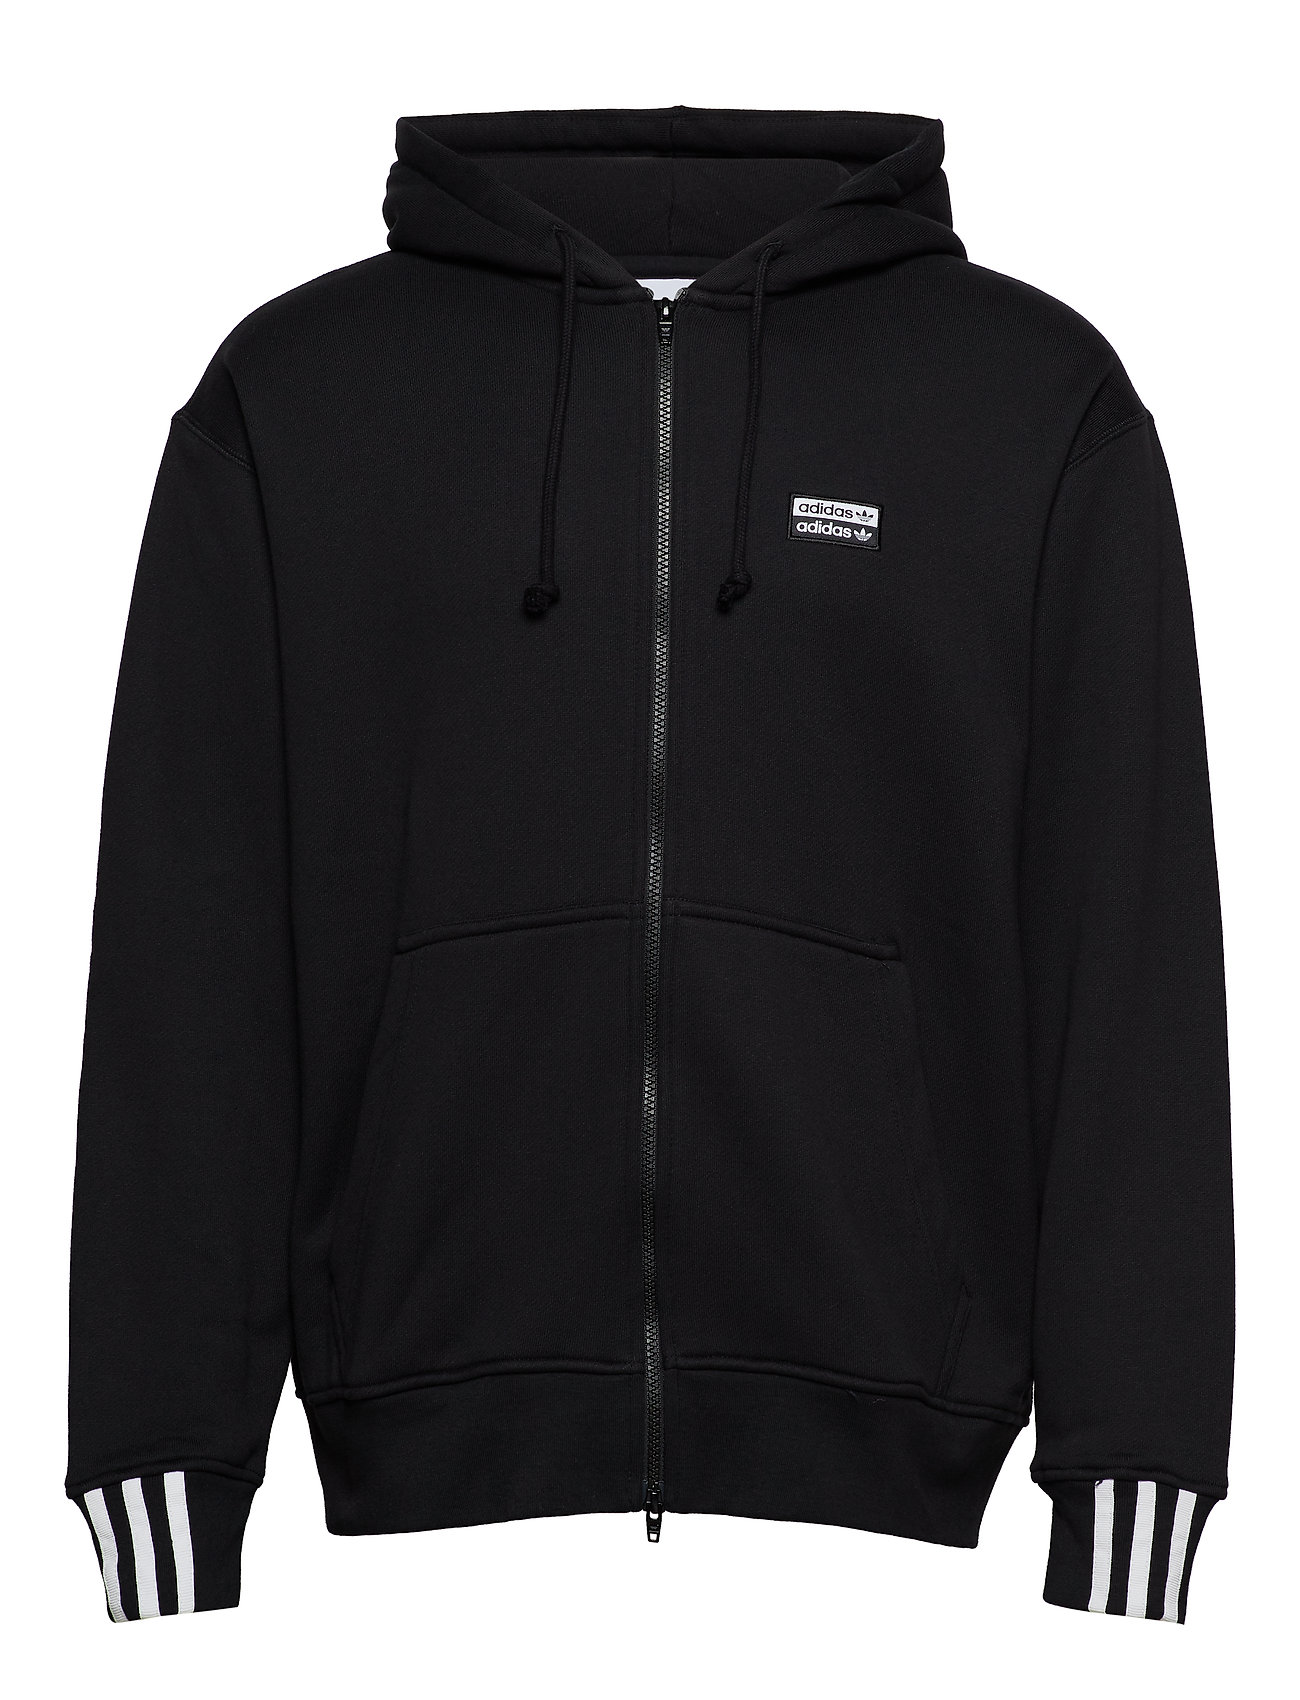 adidas Originals Vocal Fz Hoody (Black), (44.97 €) | Large selection of  outlet-styles | Booztlet.com